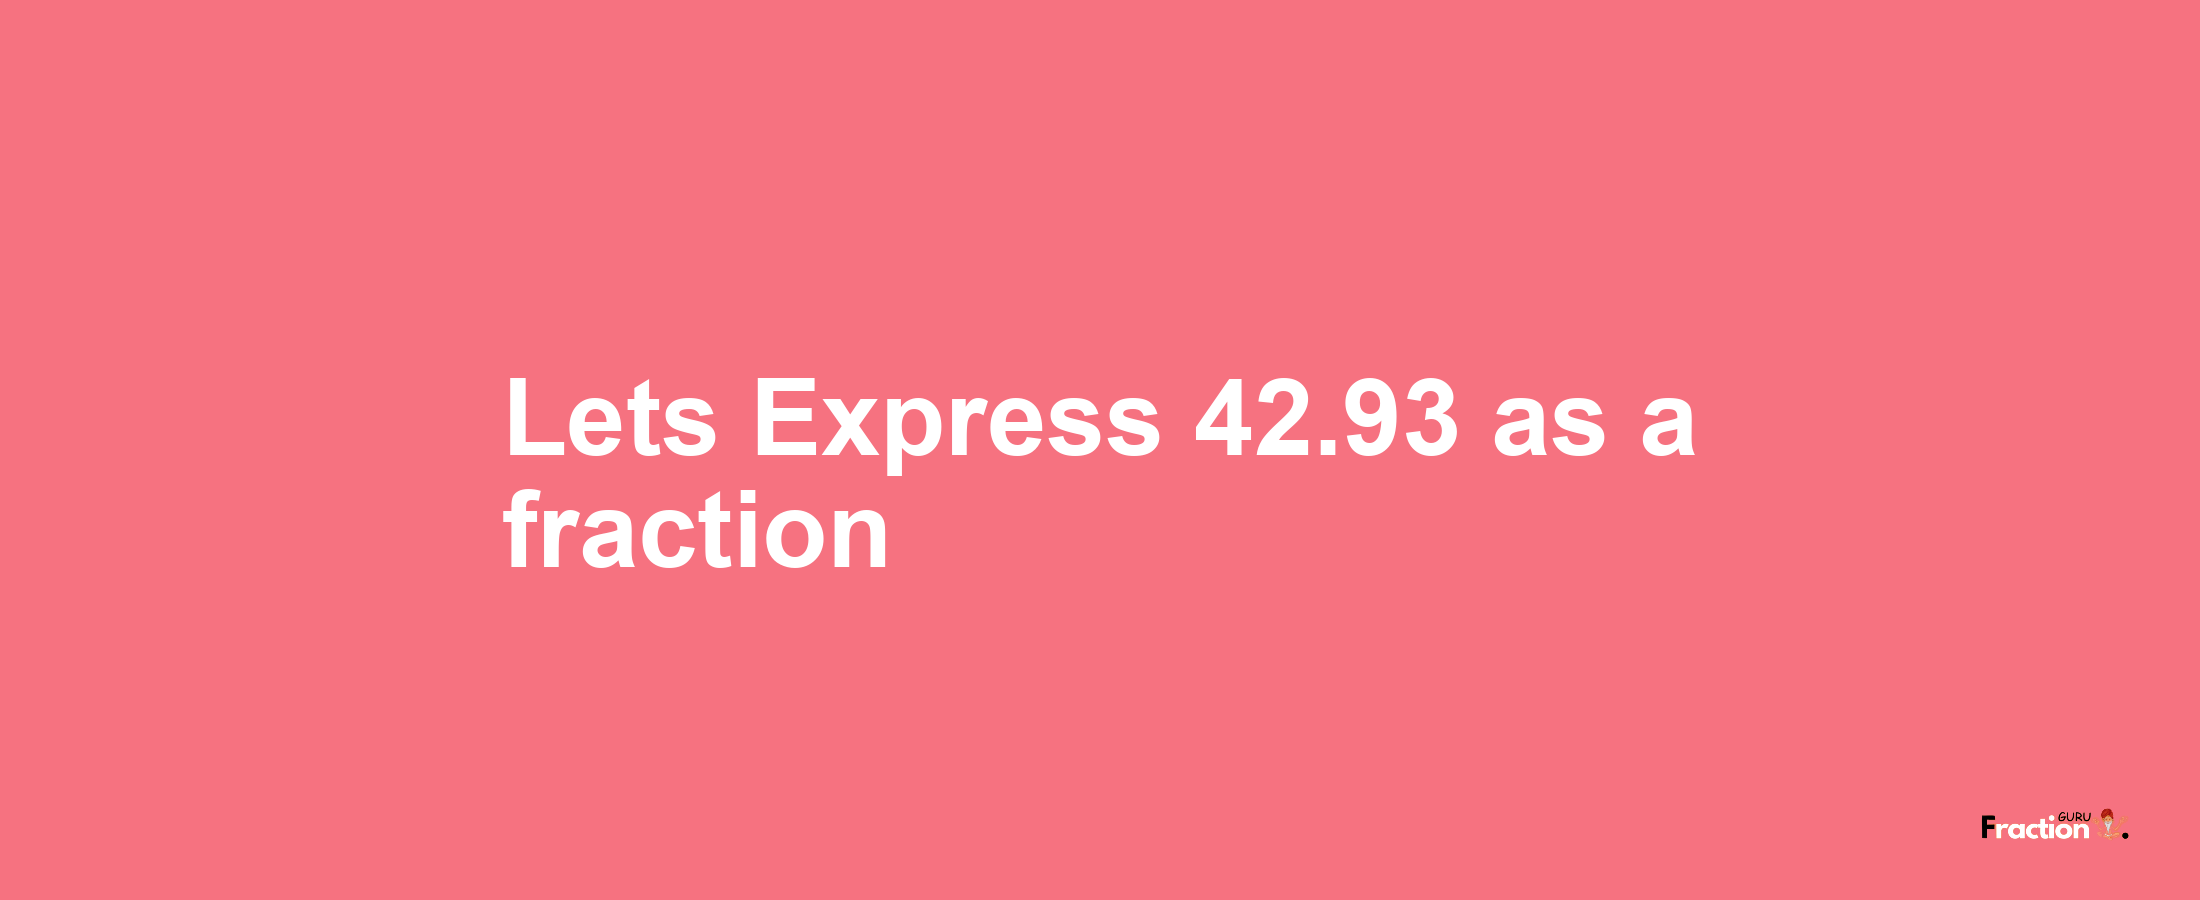 Lets Express 42.93 as afraction